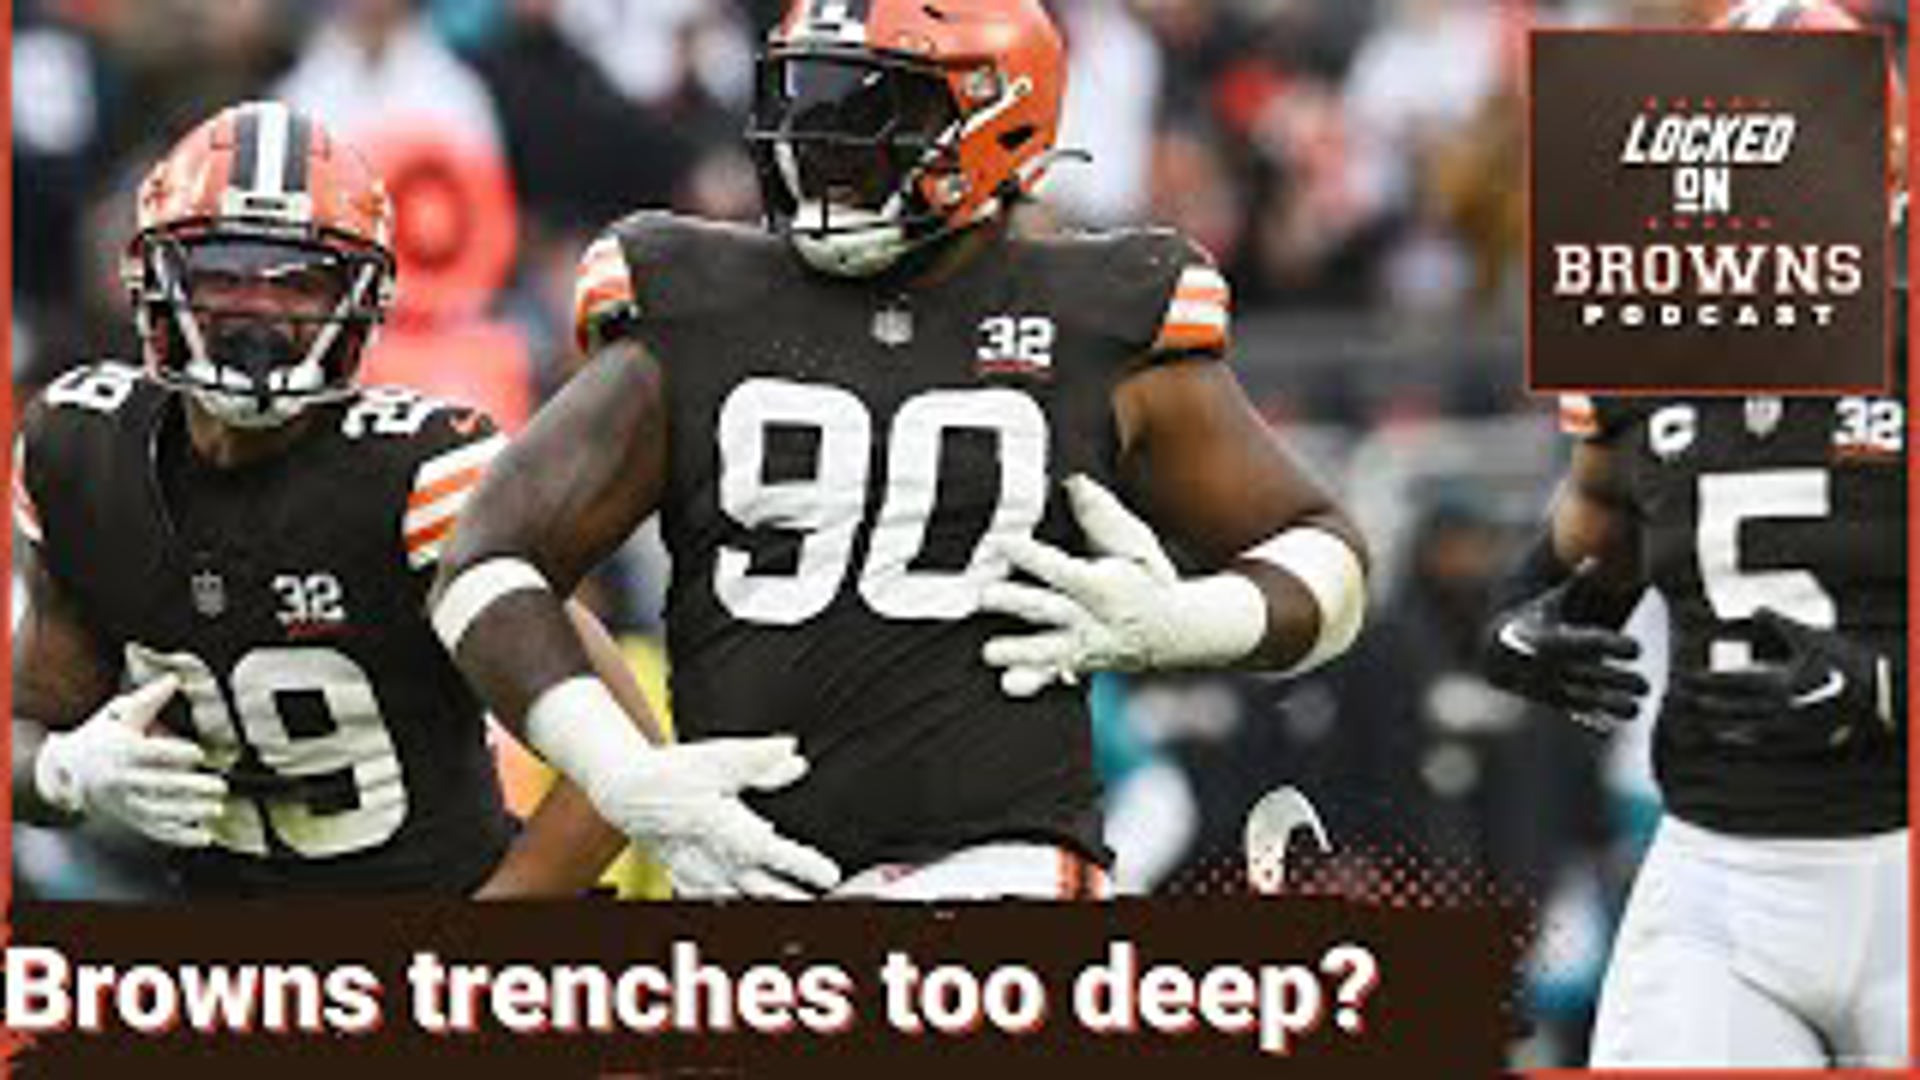 The Cleveland Browns did such a good job working on the offensive and defensive trenches that it will lead to tough decisions come cut down time.